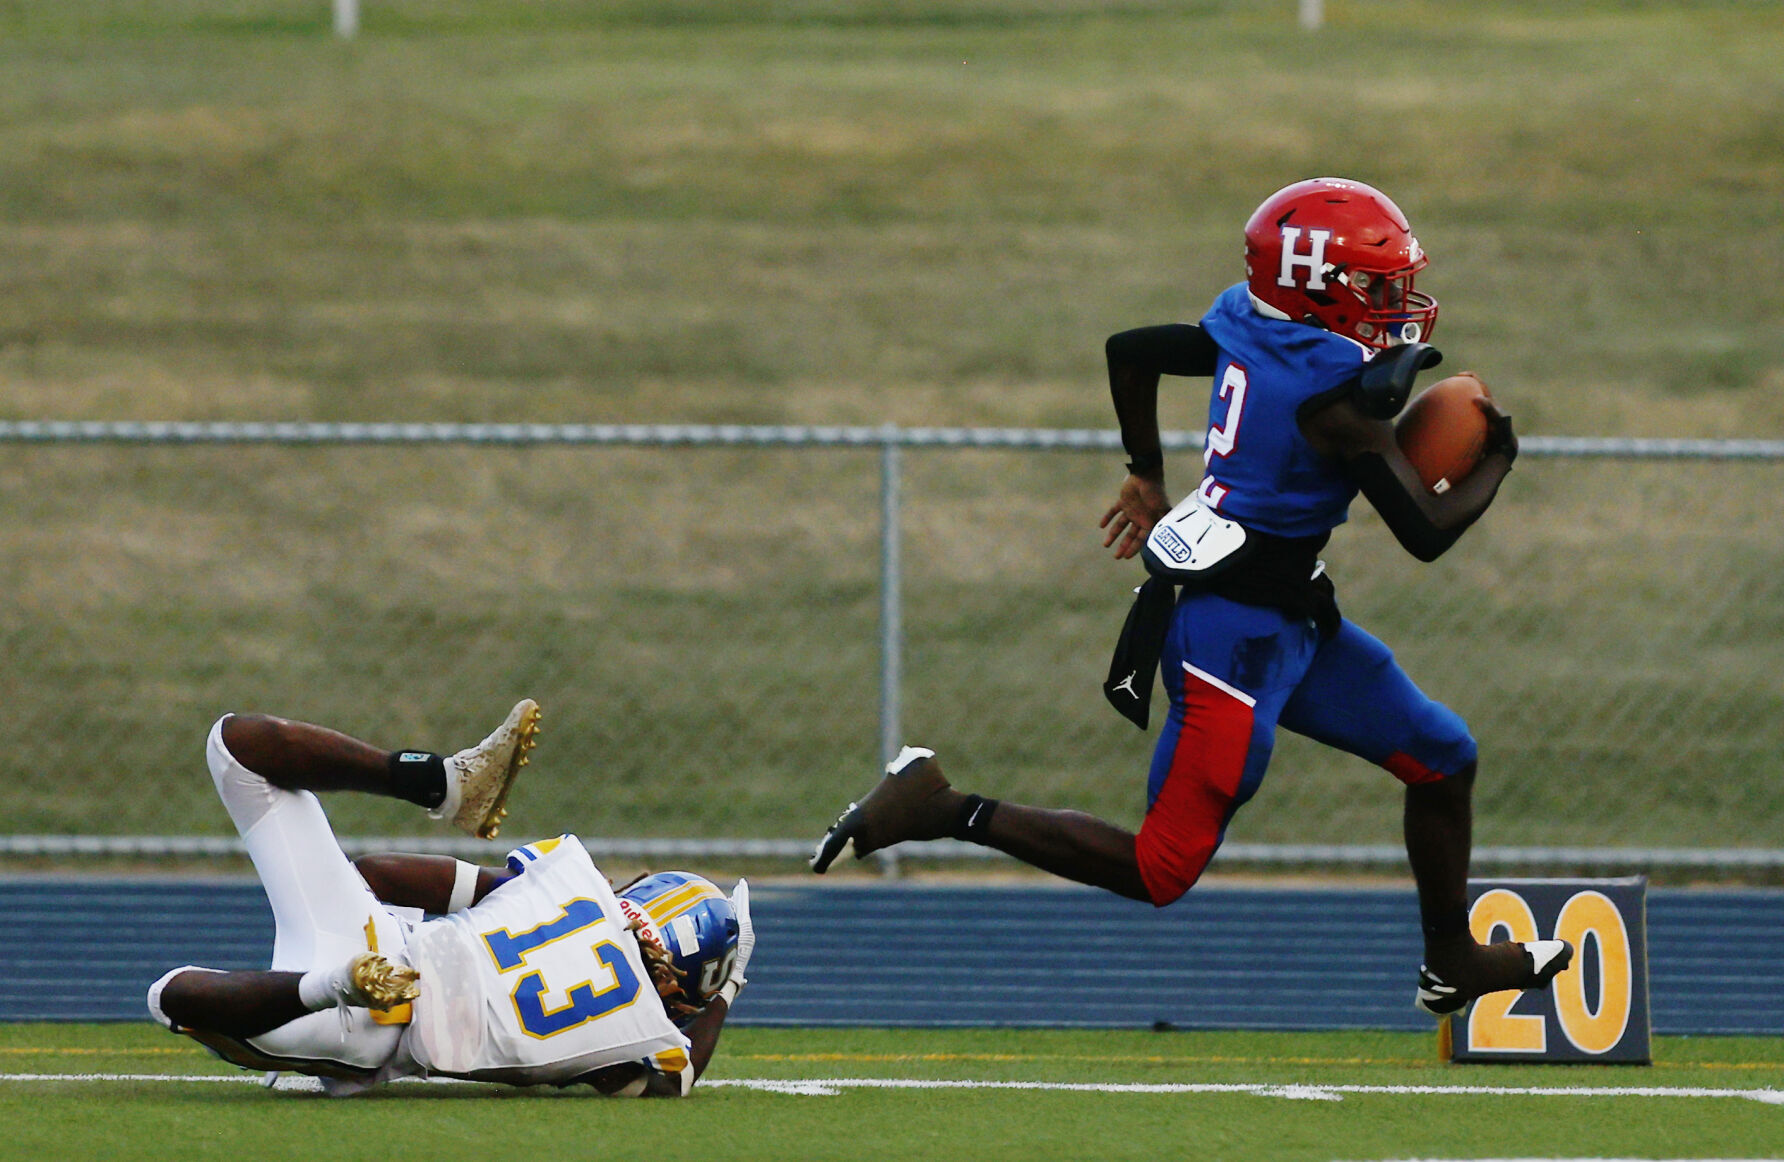 No. 10 Hermitage Puts up a Strong Fight Against Power Team Oscar Smith: Football Recap